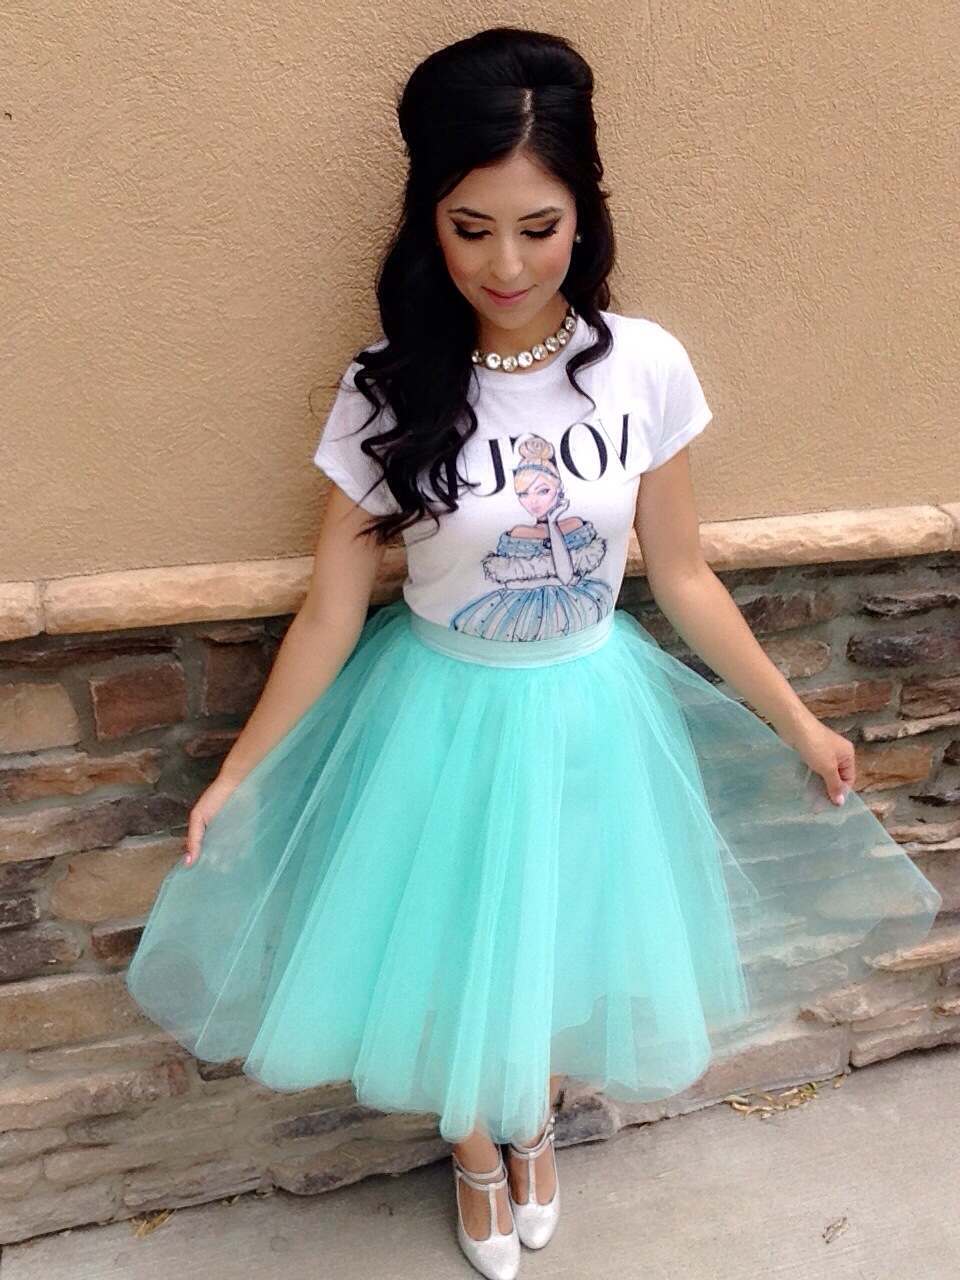 Disney Princess Cinderella + Mint Tulle Skirt Outfit! Featuring Space 46  Boutique! | A Modest Fashion & Faith Blog